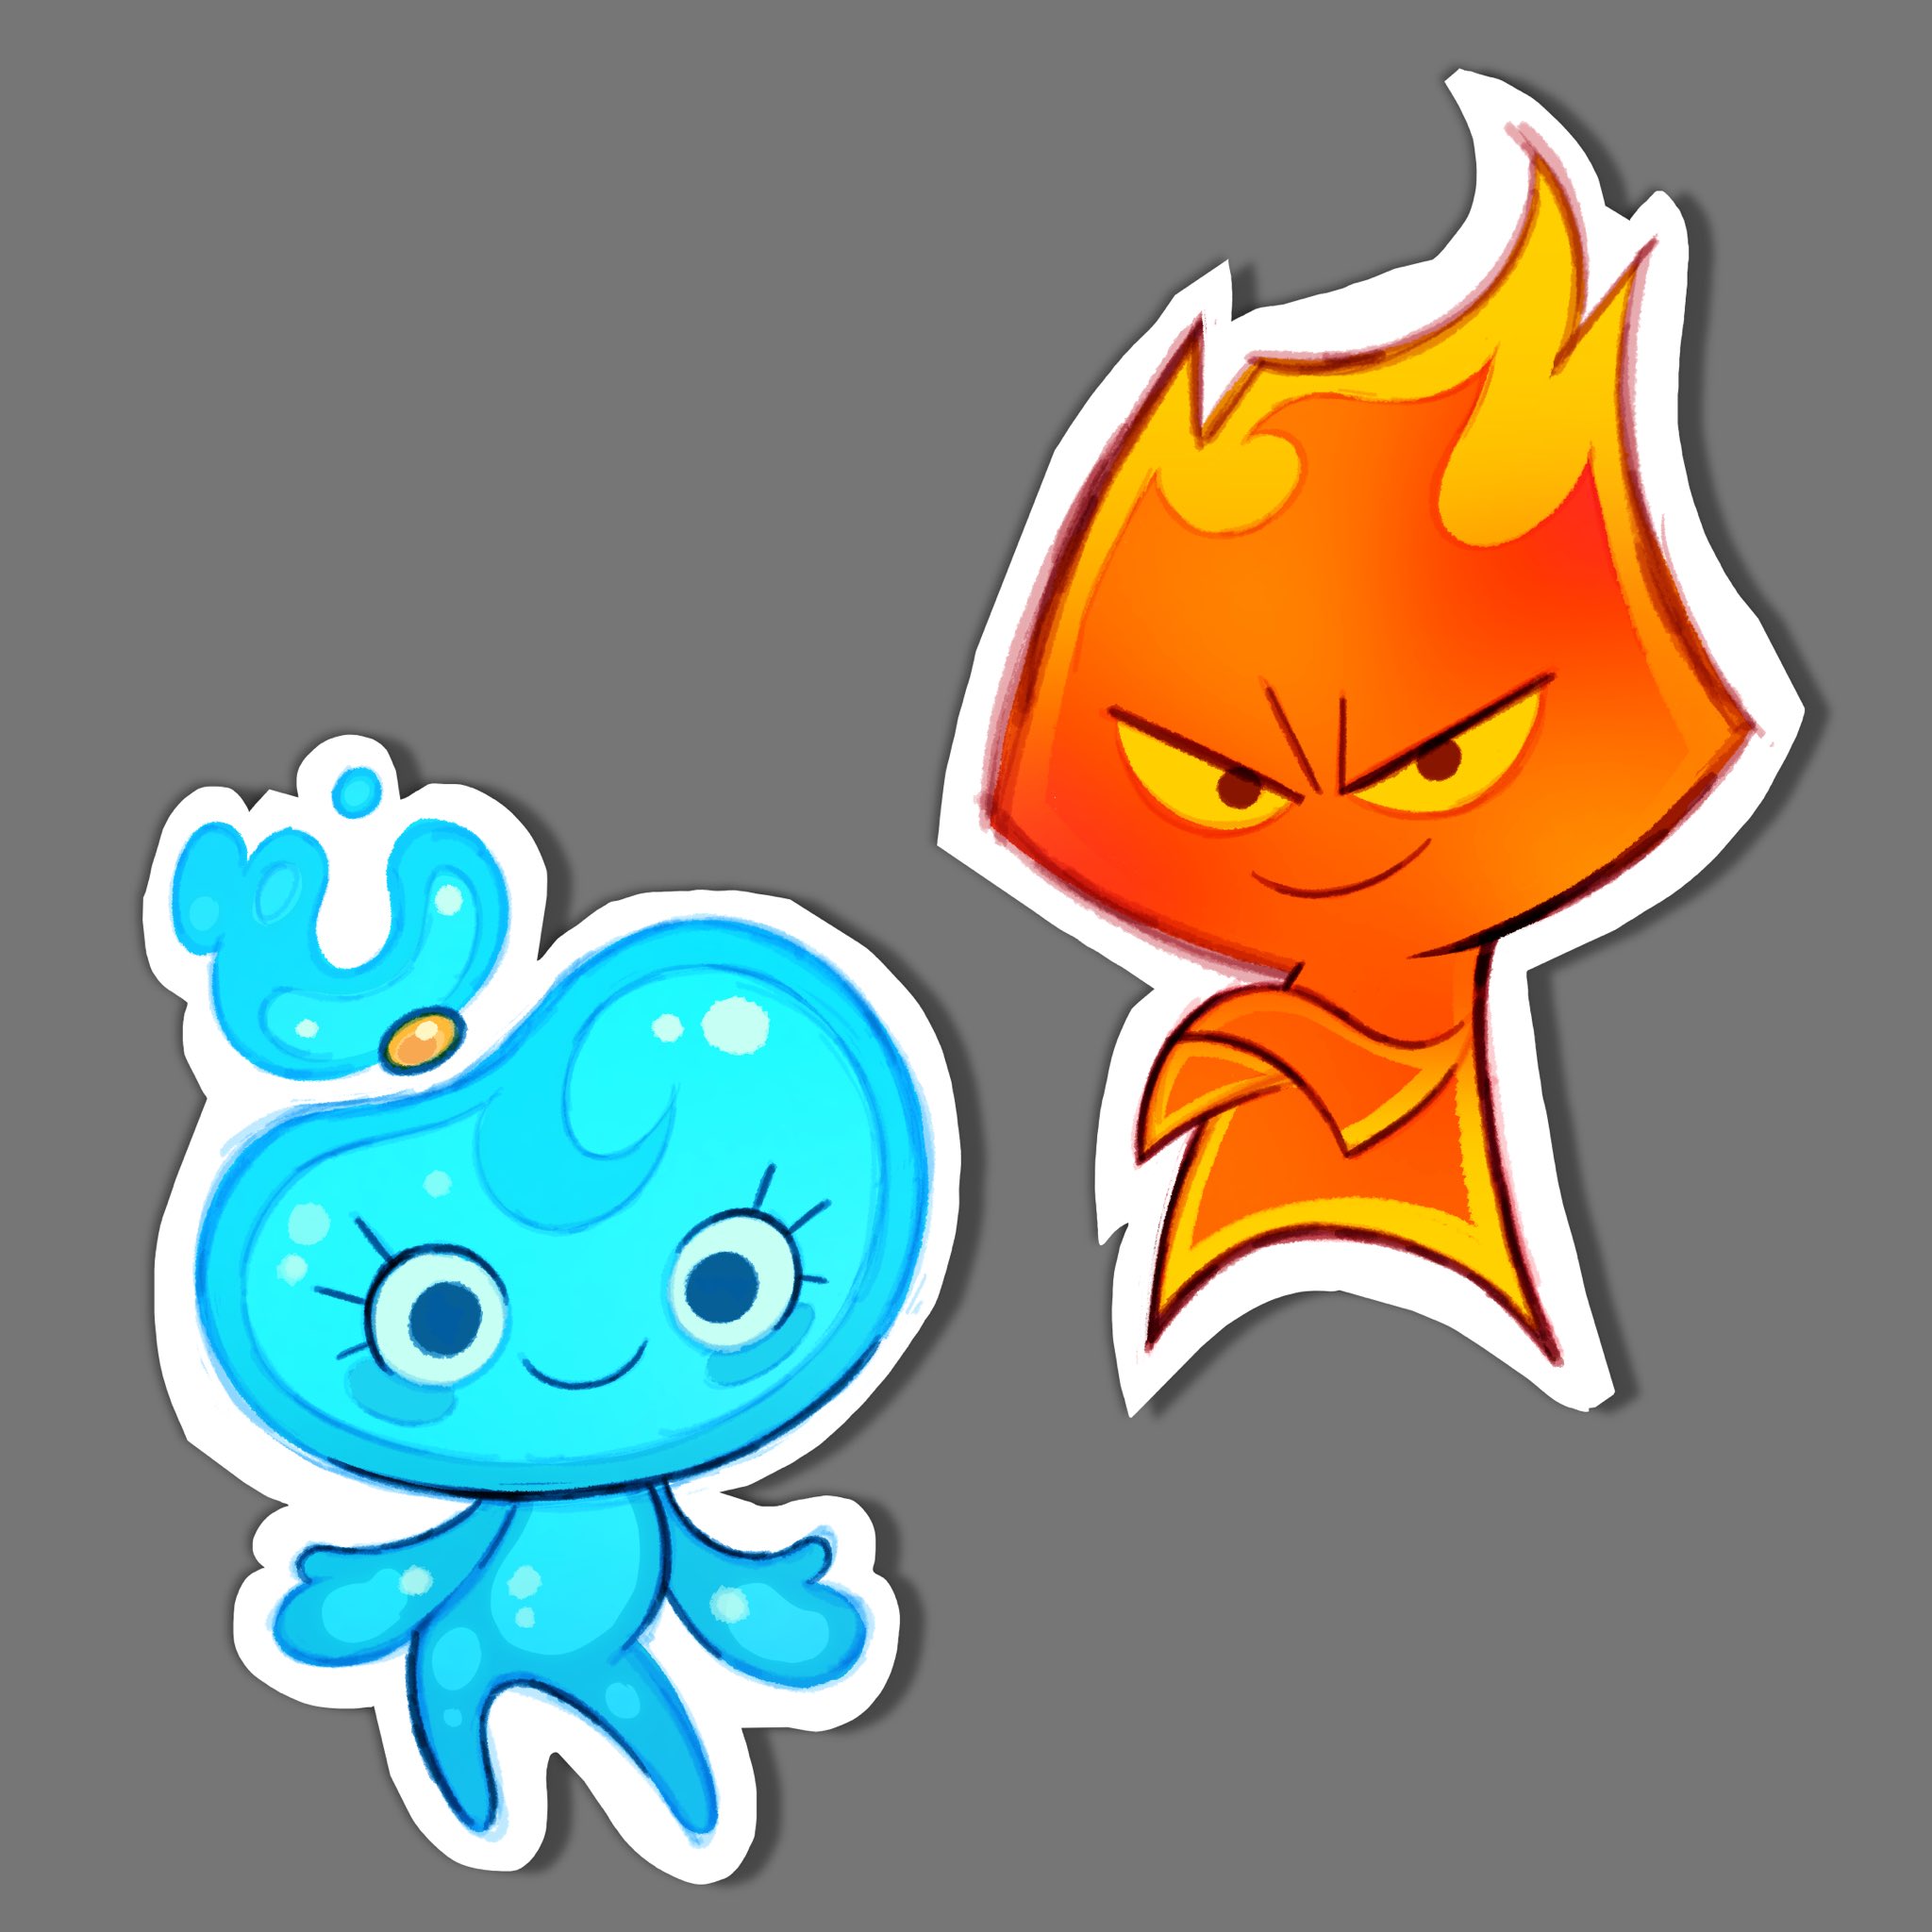 Riki on X: Fire boy and Water Girl  / X